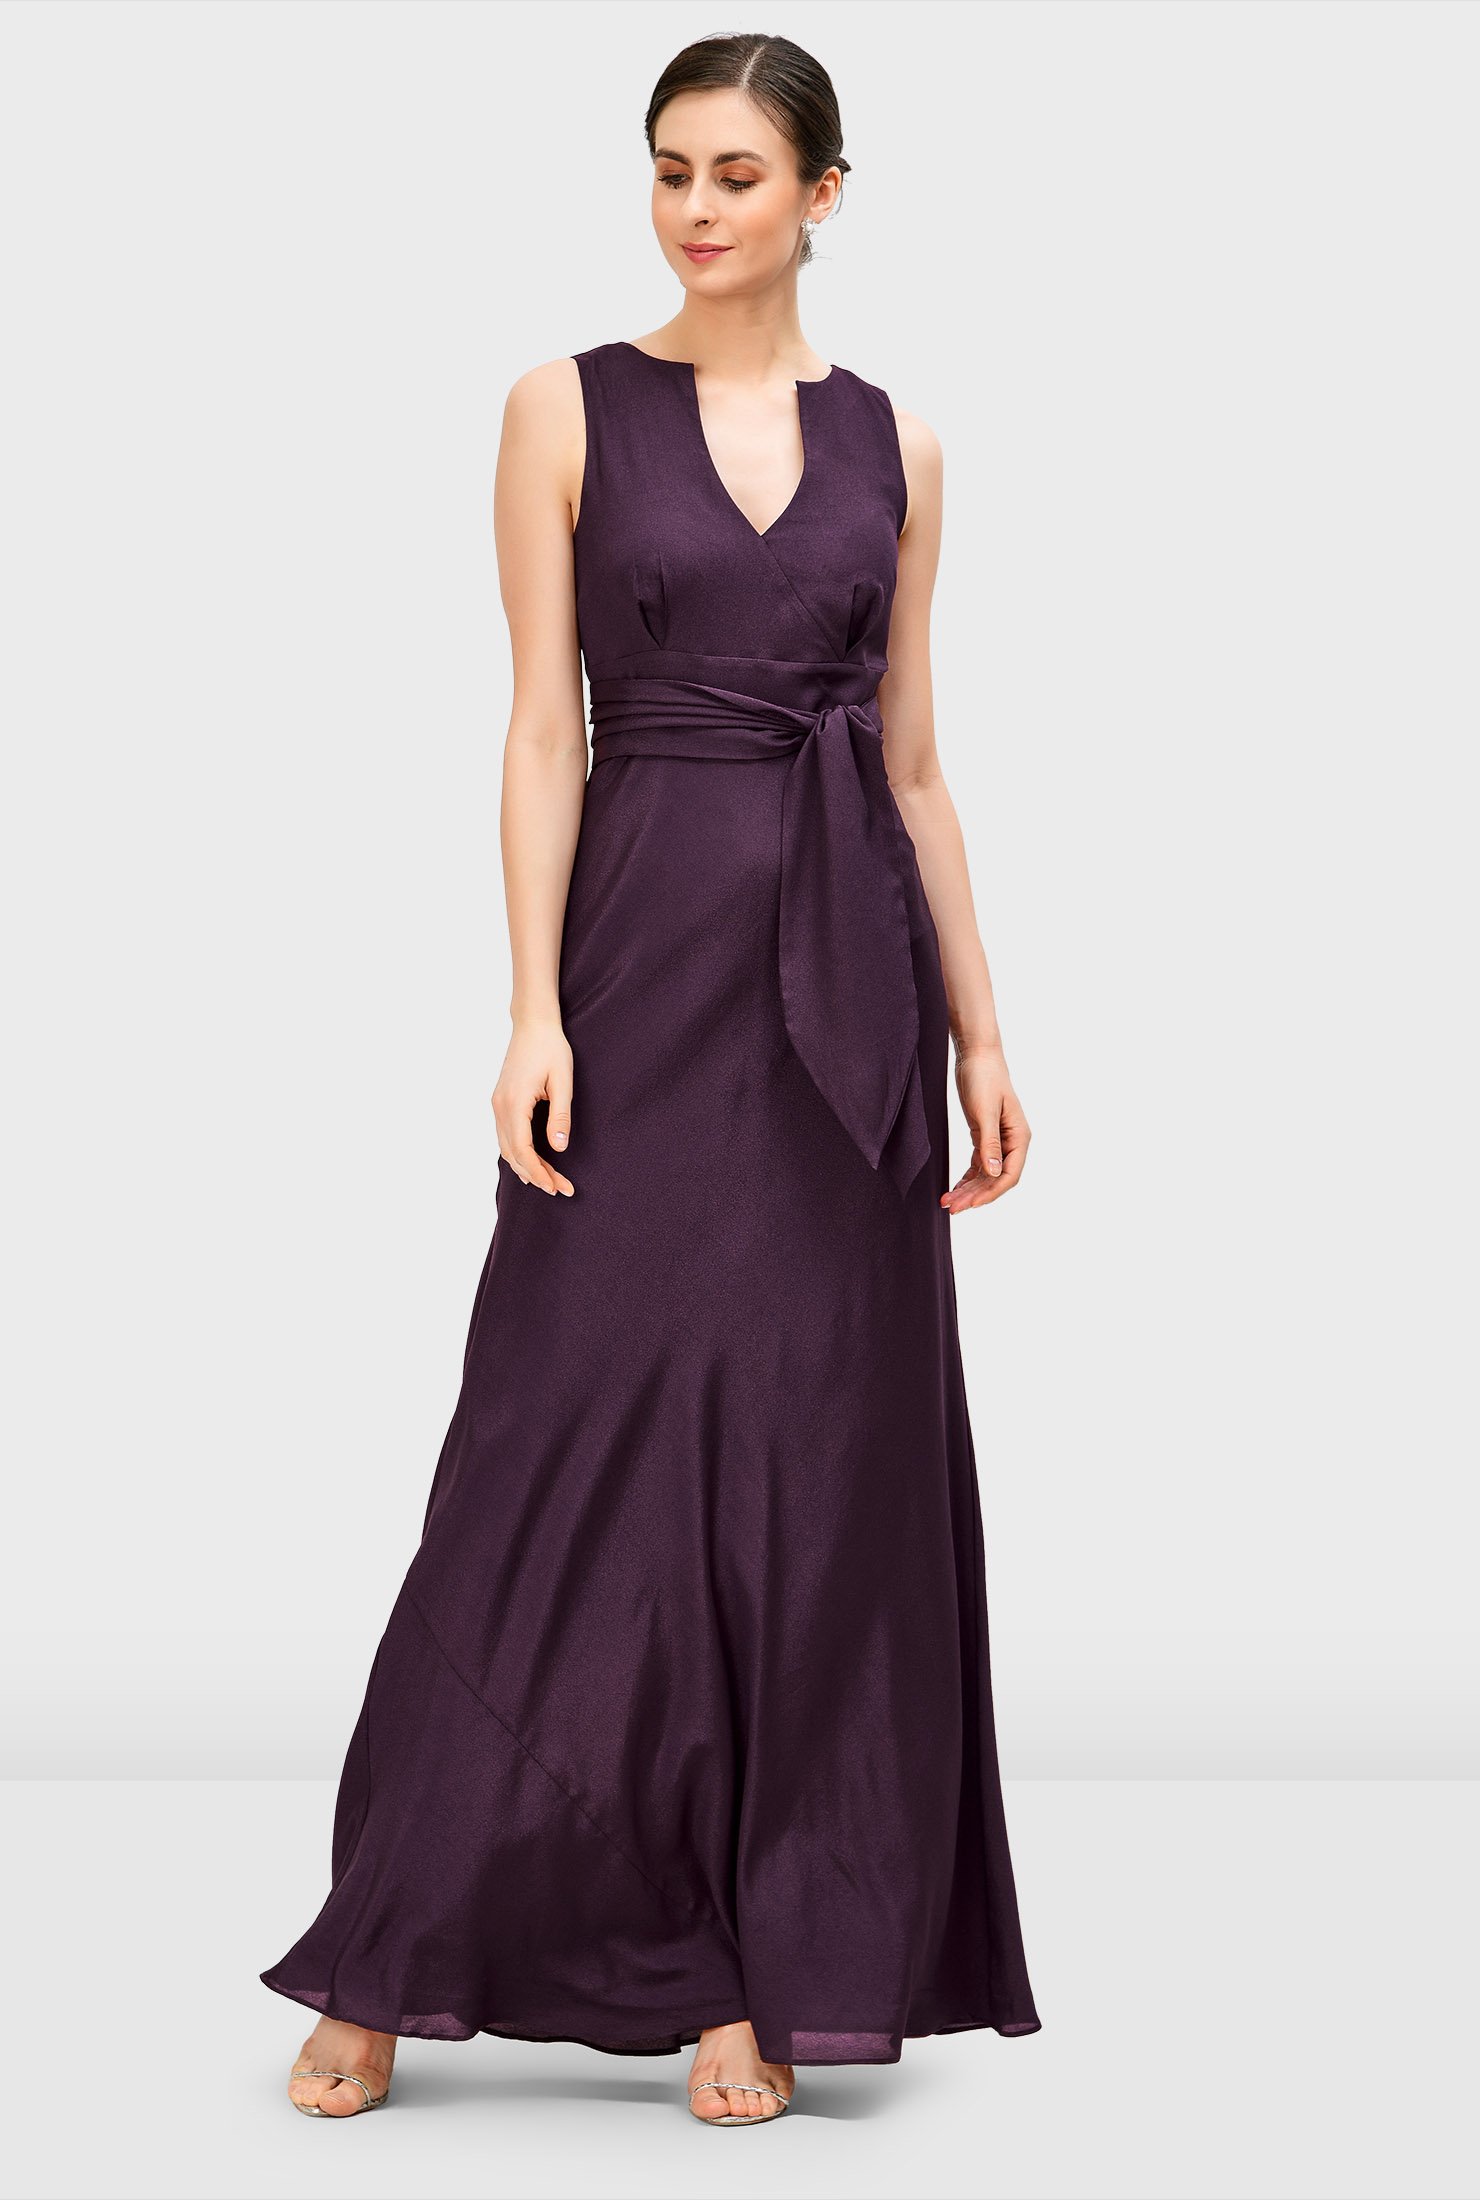 Earn the title of best-dressed wedding guest in our elegant crepe dress styled with a surplice bodice, empire waist and floor-length full flare skirt.